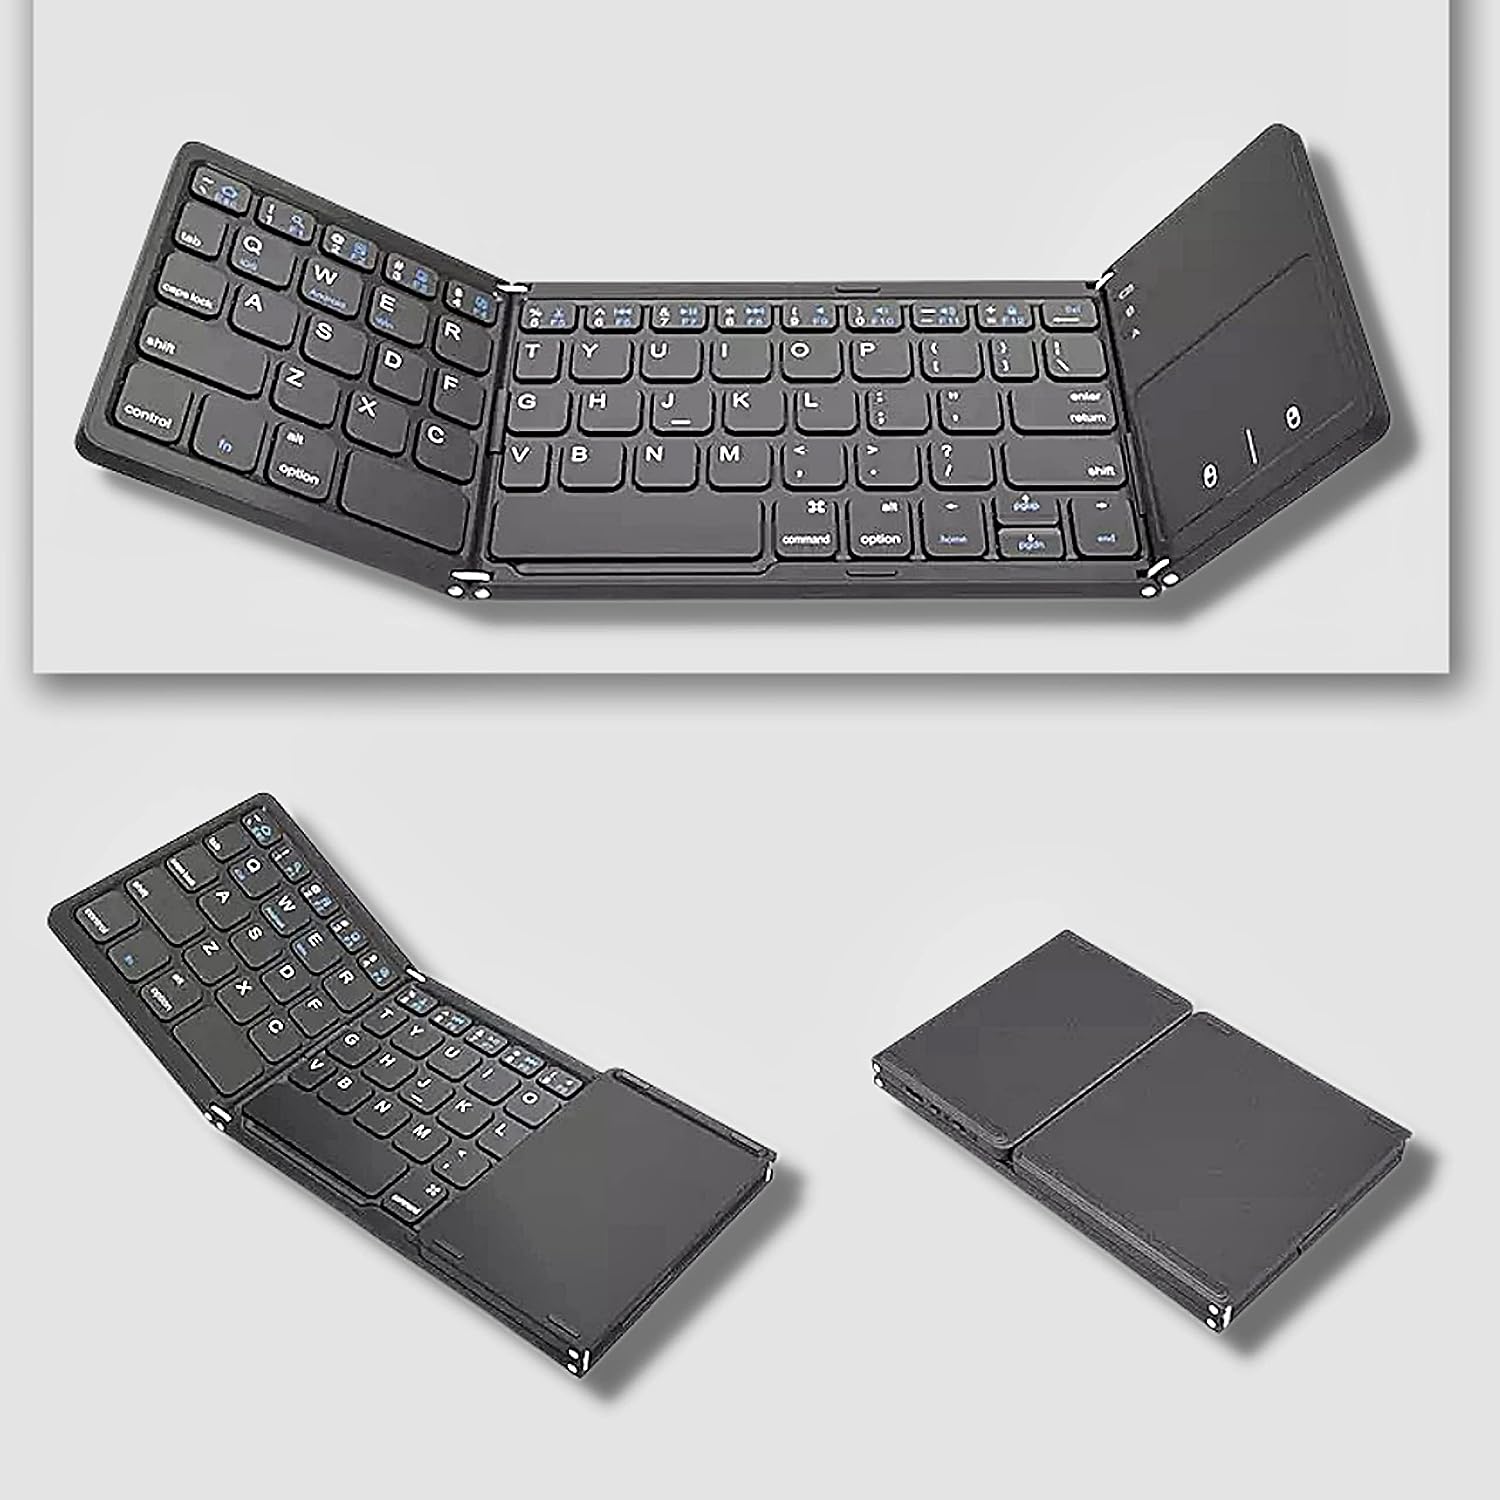 Openup Portable Wireless Bluetooth Folding Keyboard, Ultra Slim Pocket Size, Rechargeable, for iOS, Android & Windows Tabs, Smartphones, with User Manual & USB Charging Cable – Black